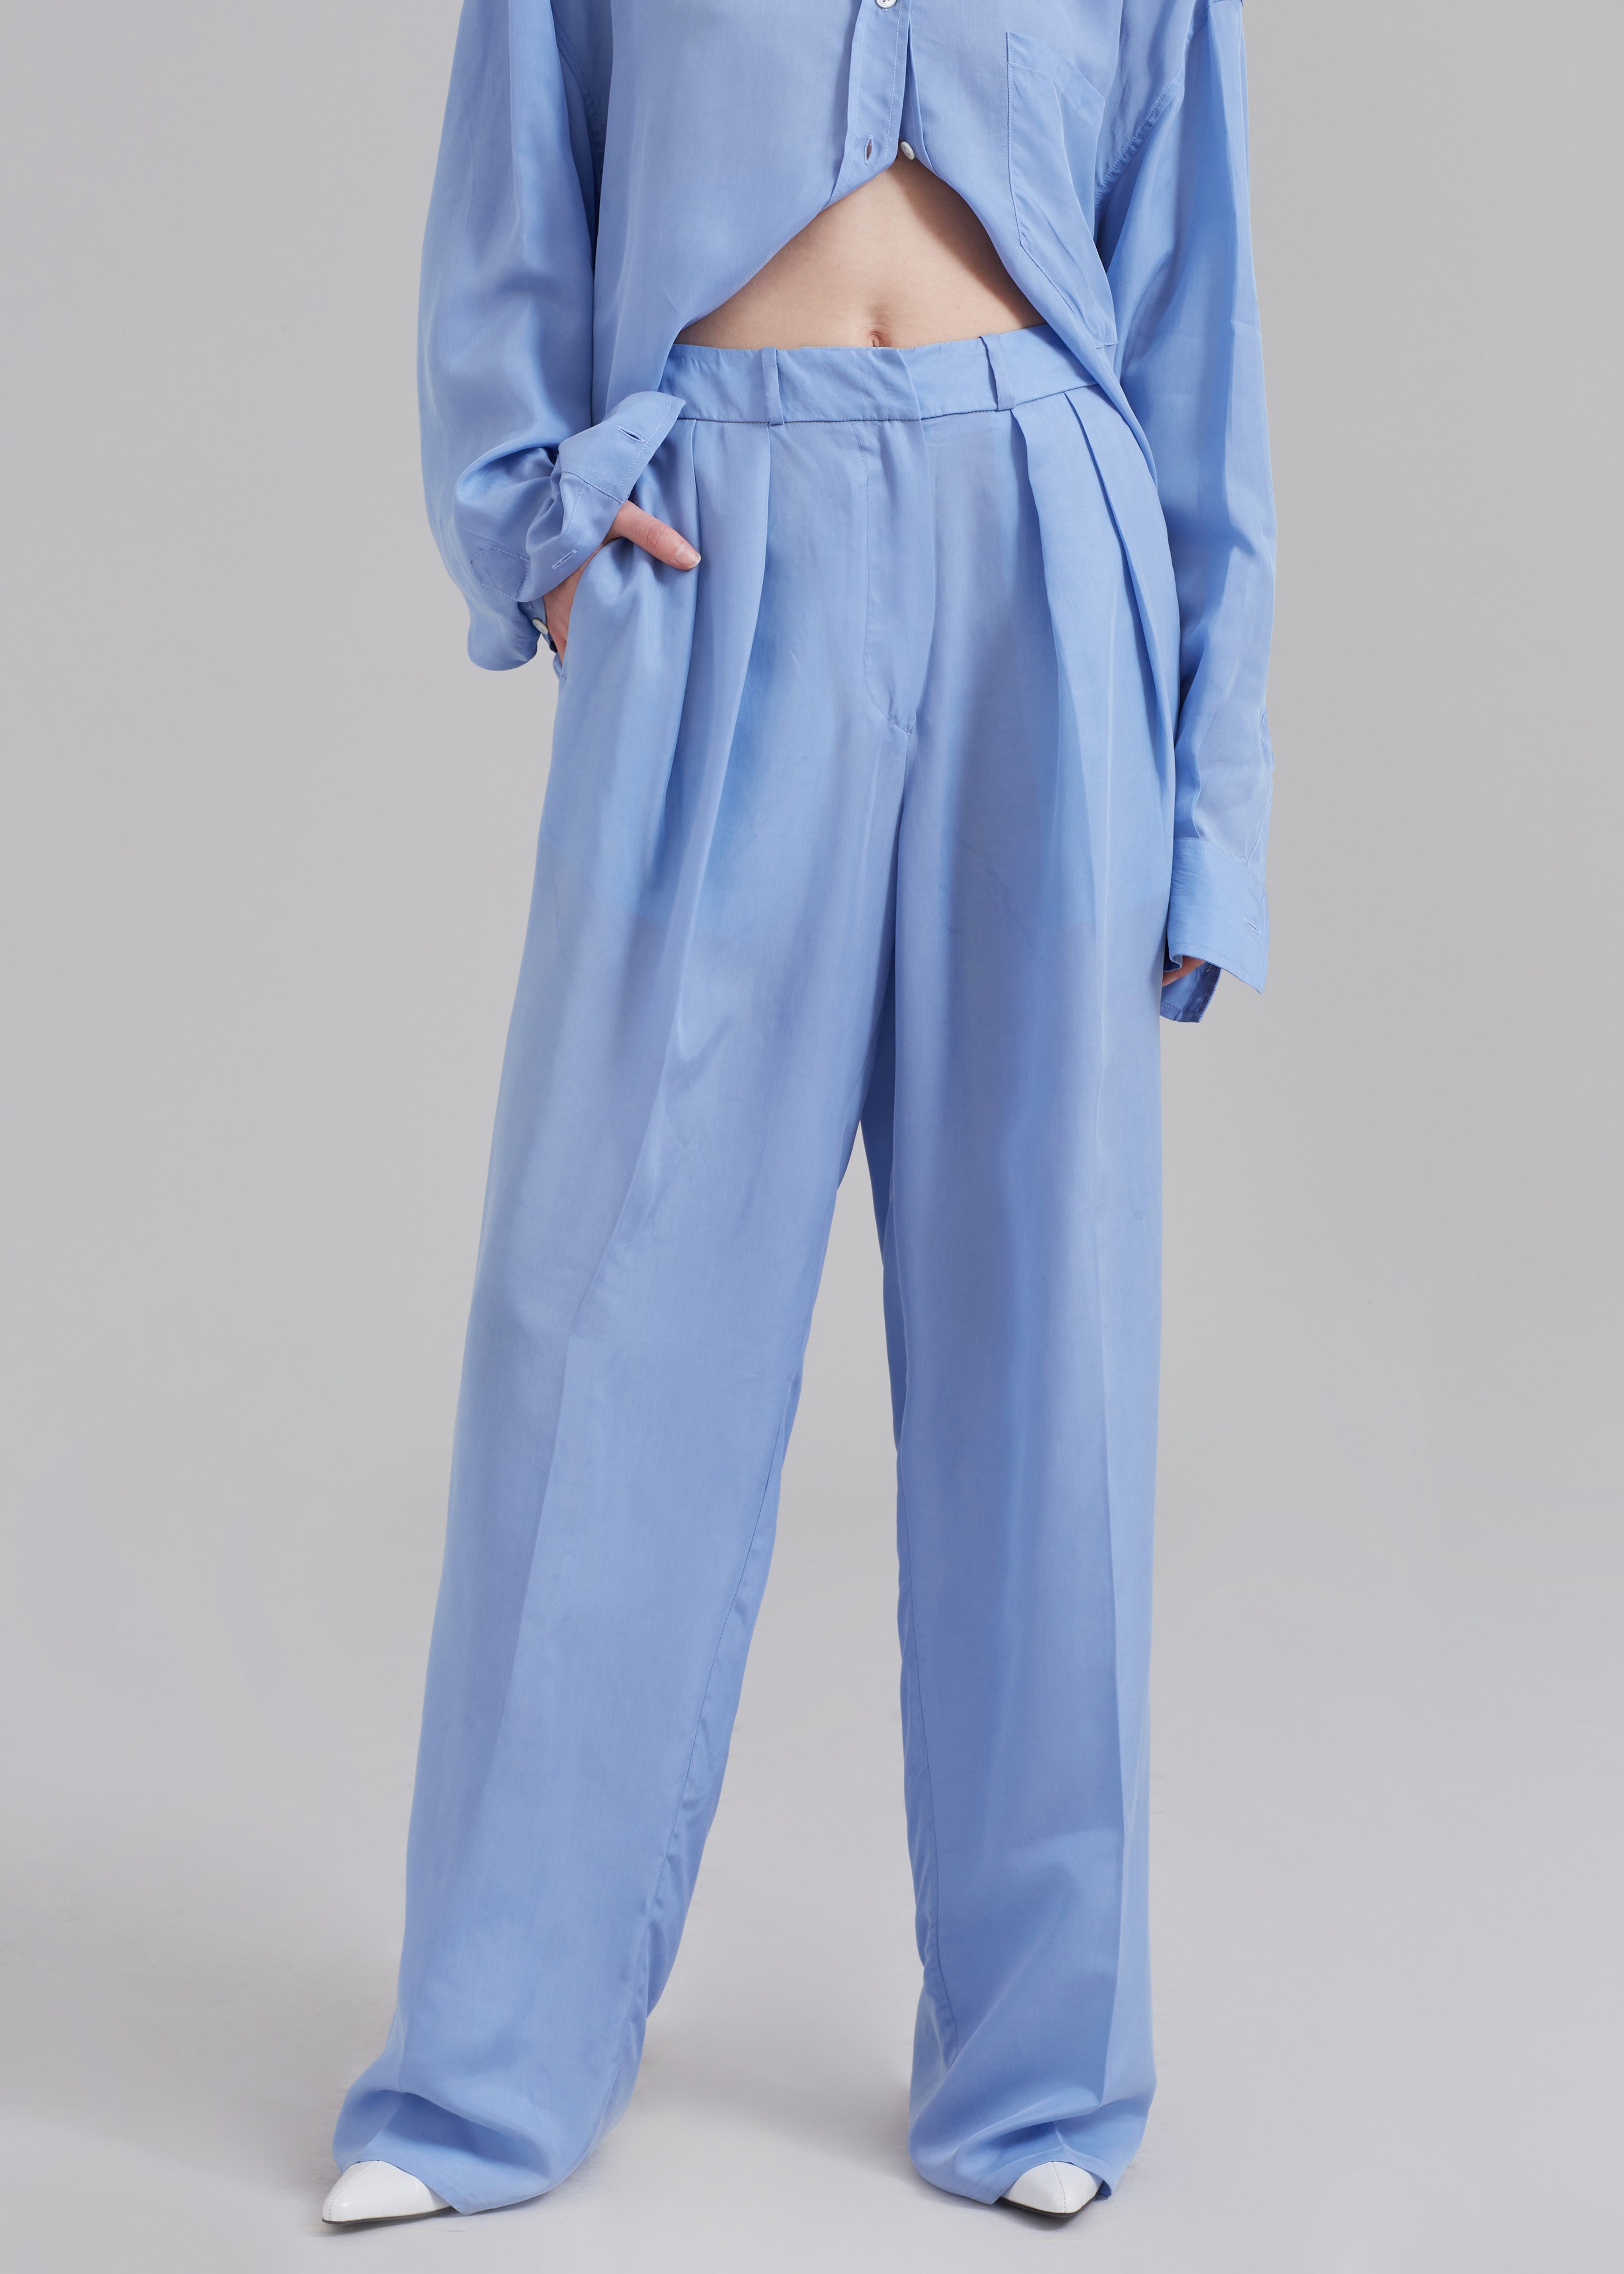 Tansy Silky Pleated Trousers - Light Blue - 6